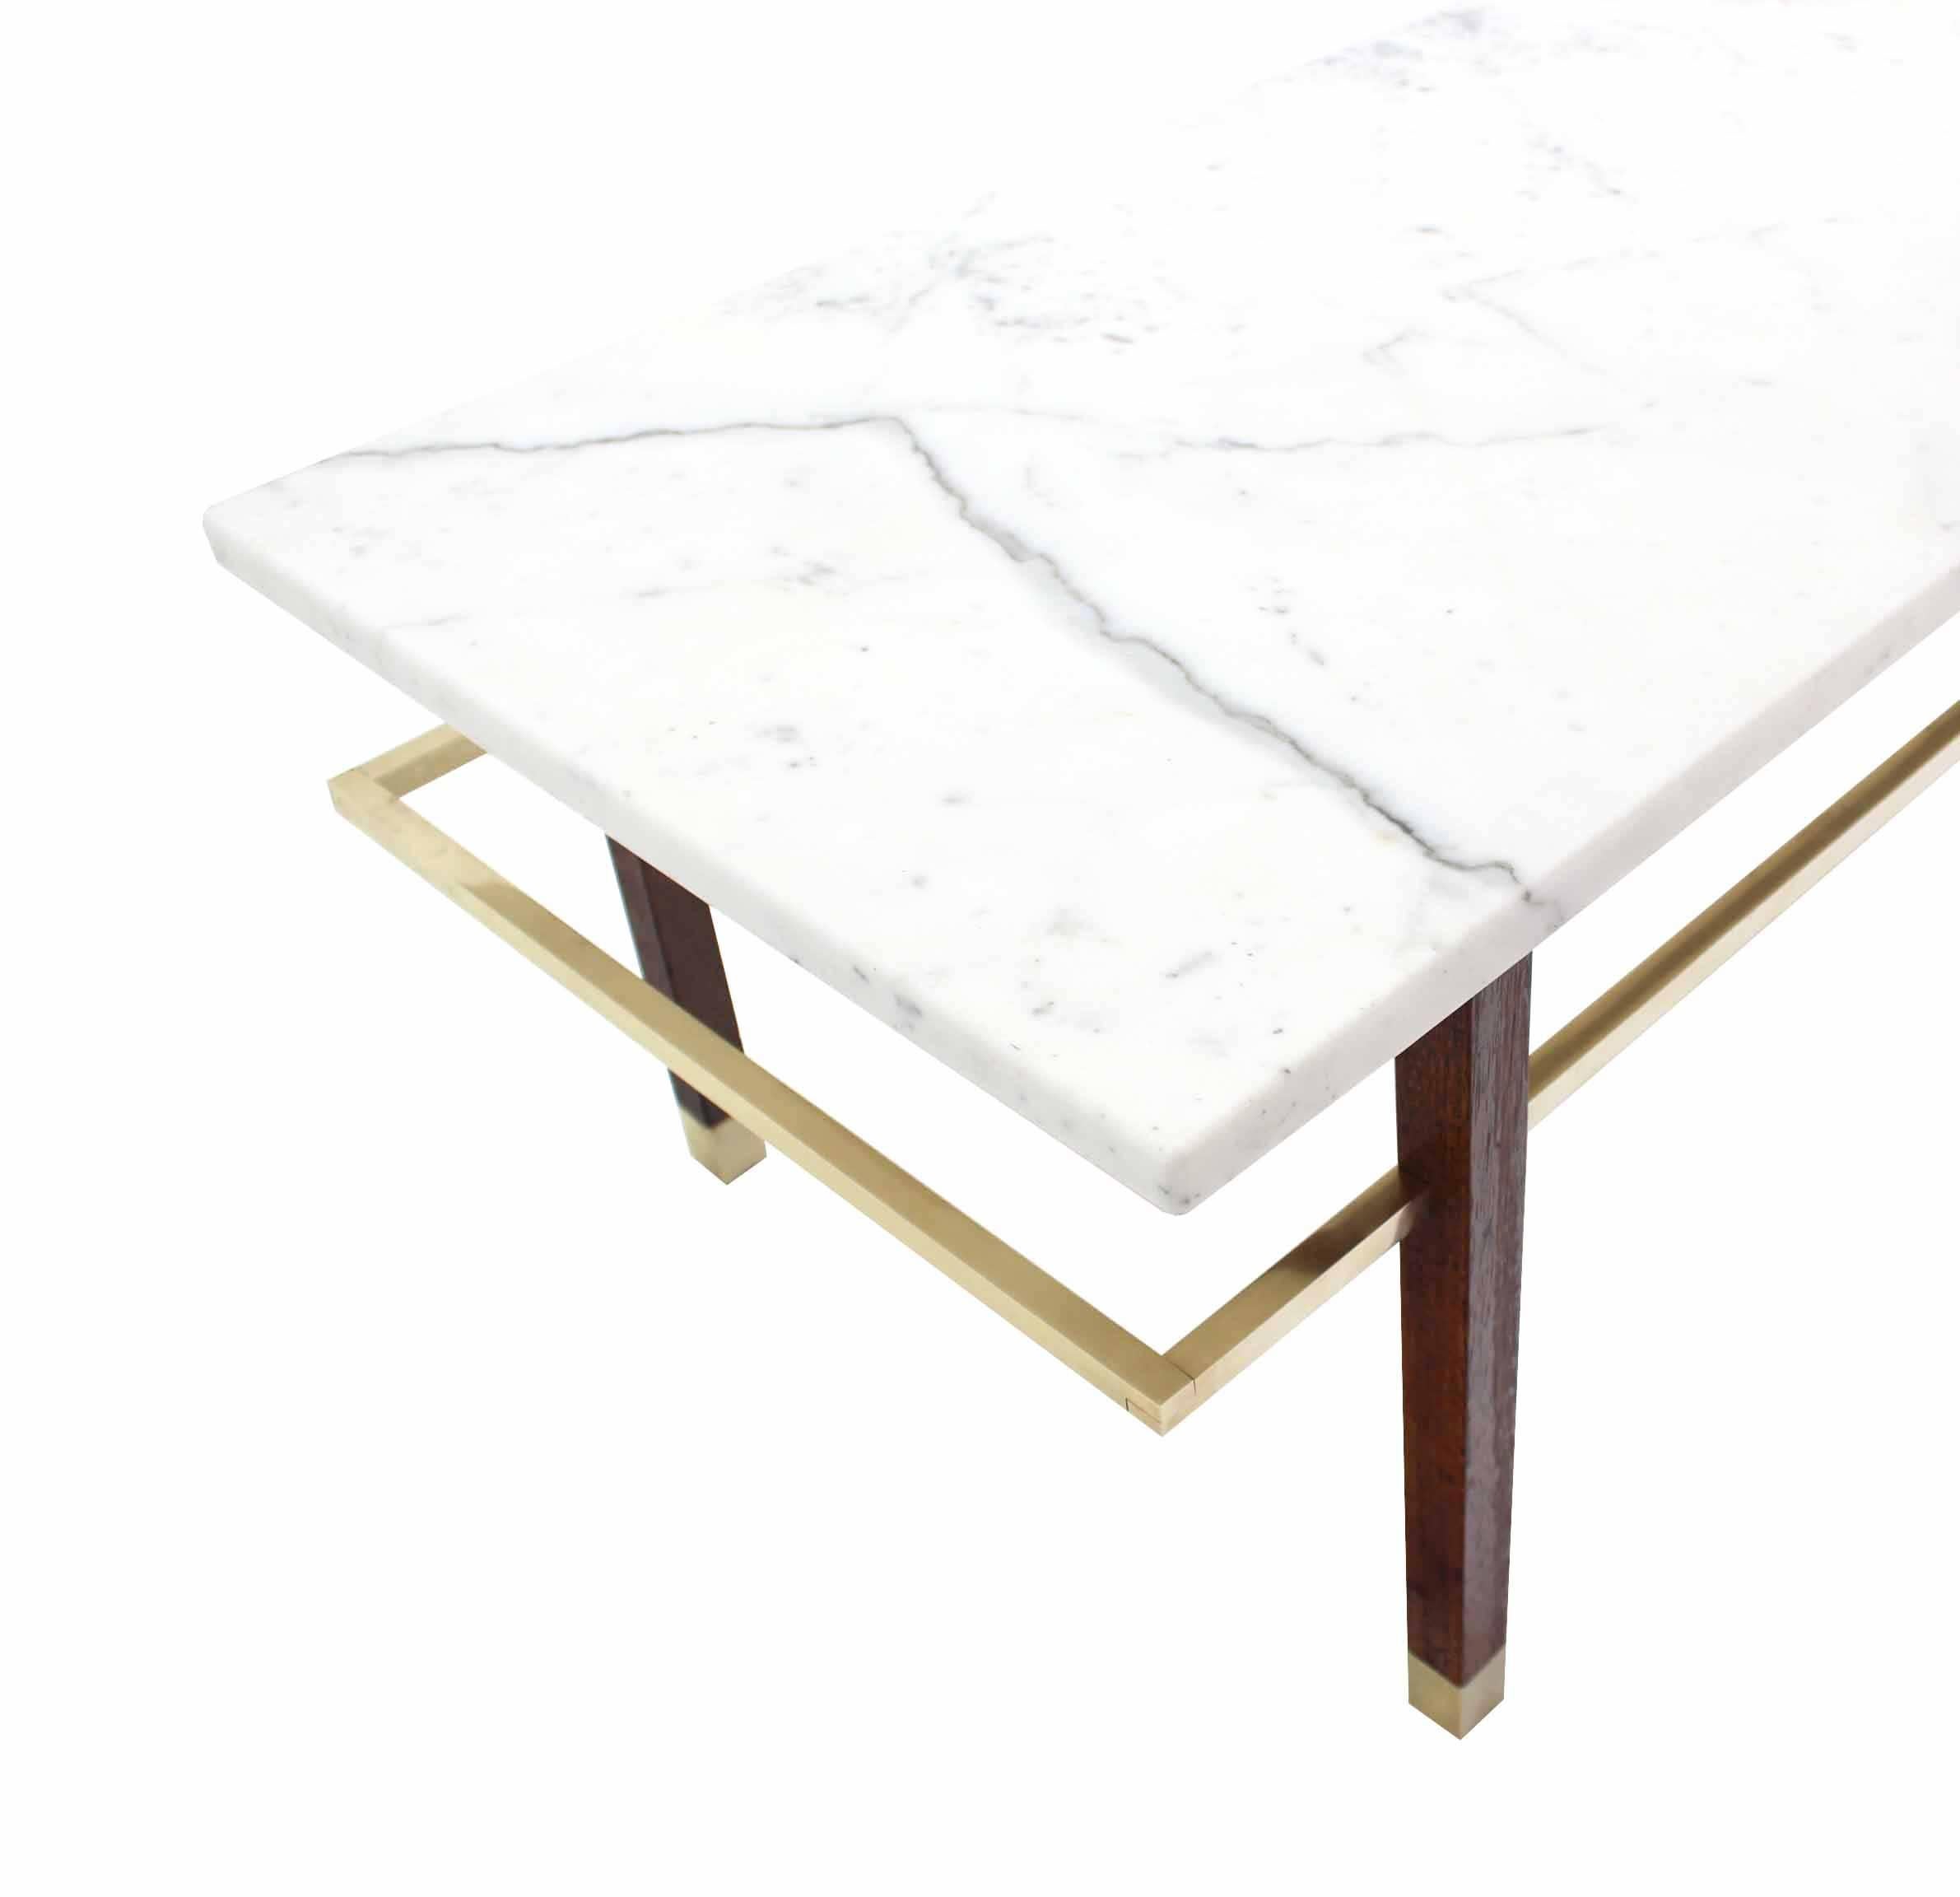 Harvey Probber Marble Top Rectangular Coffee Table w/ Brass Rectangular stretche In Excellent Condition For Sale In Rockaway, NJ